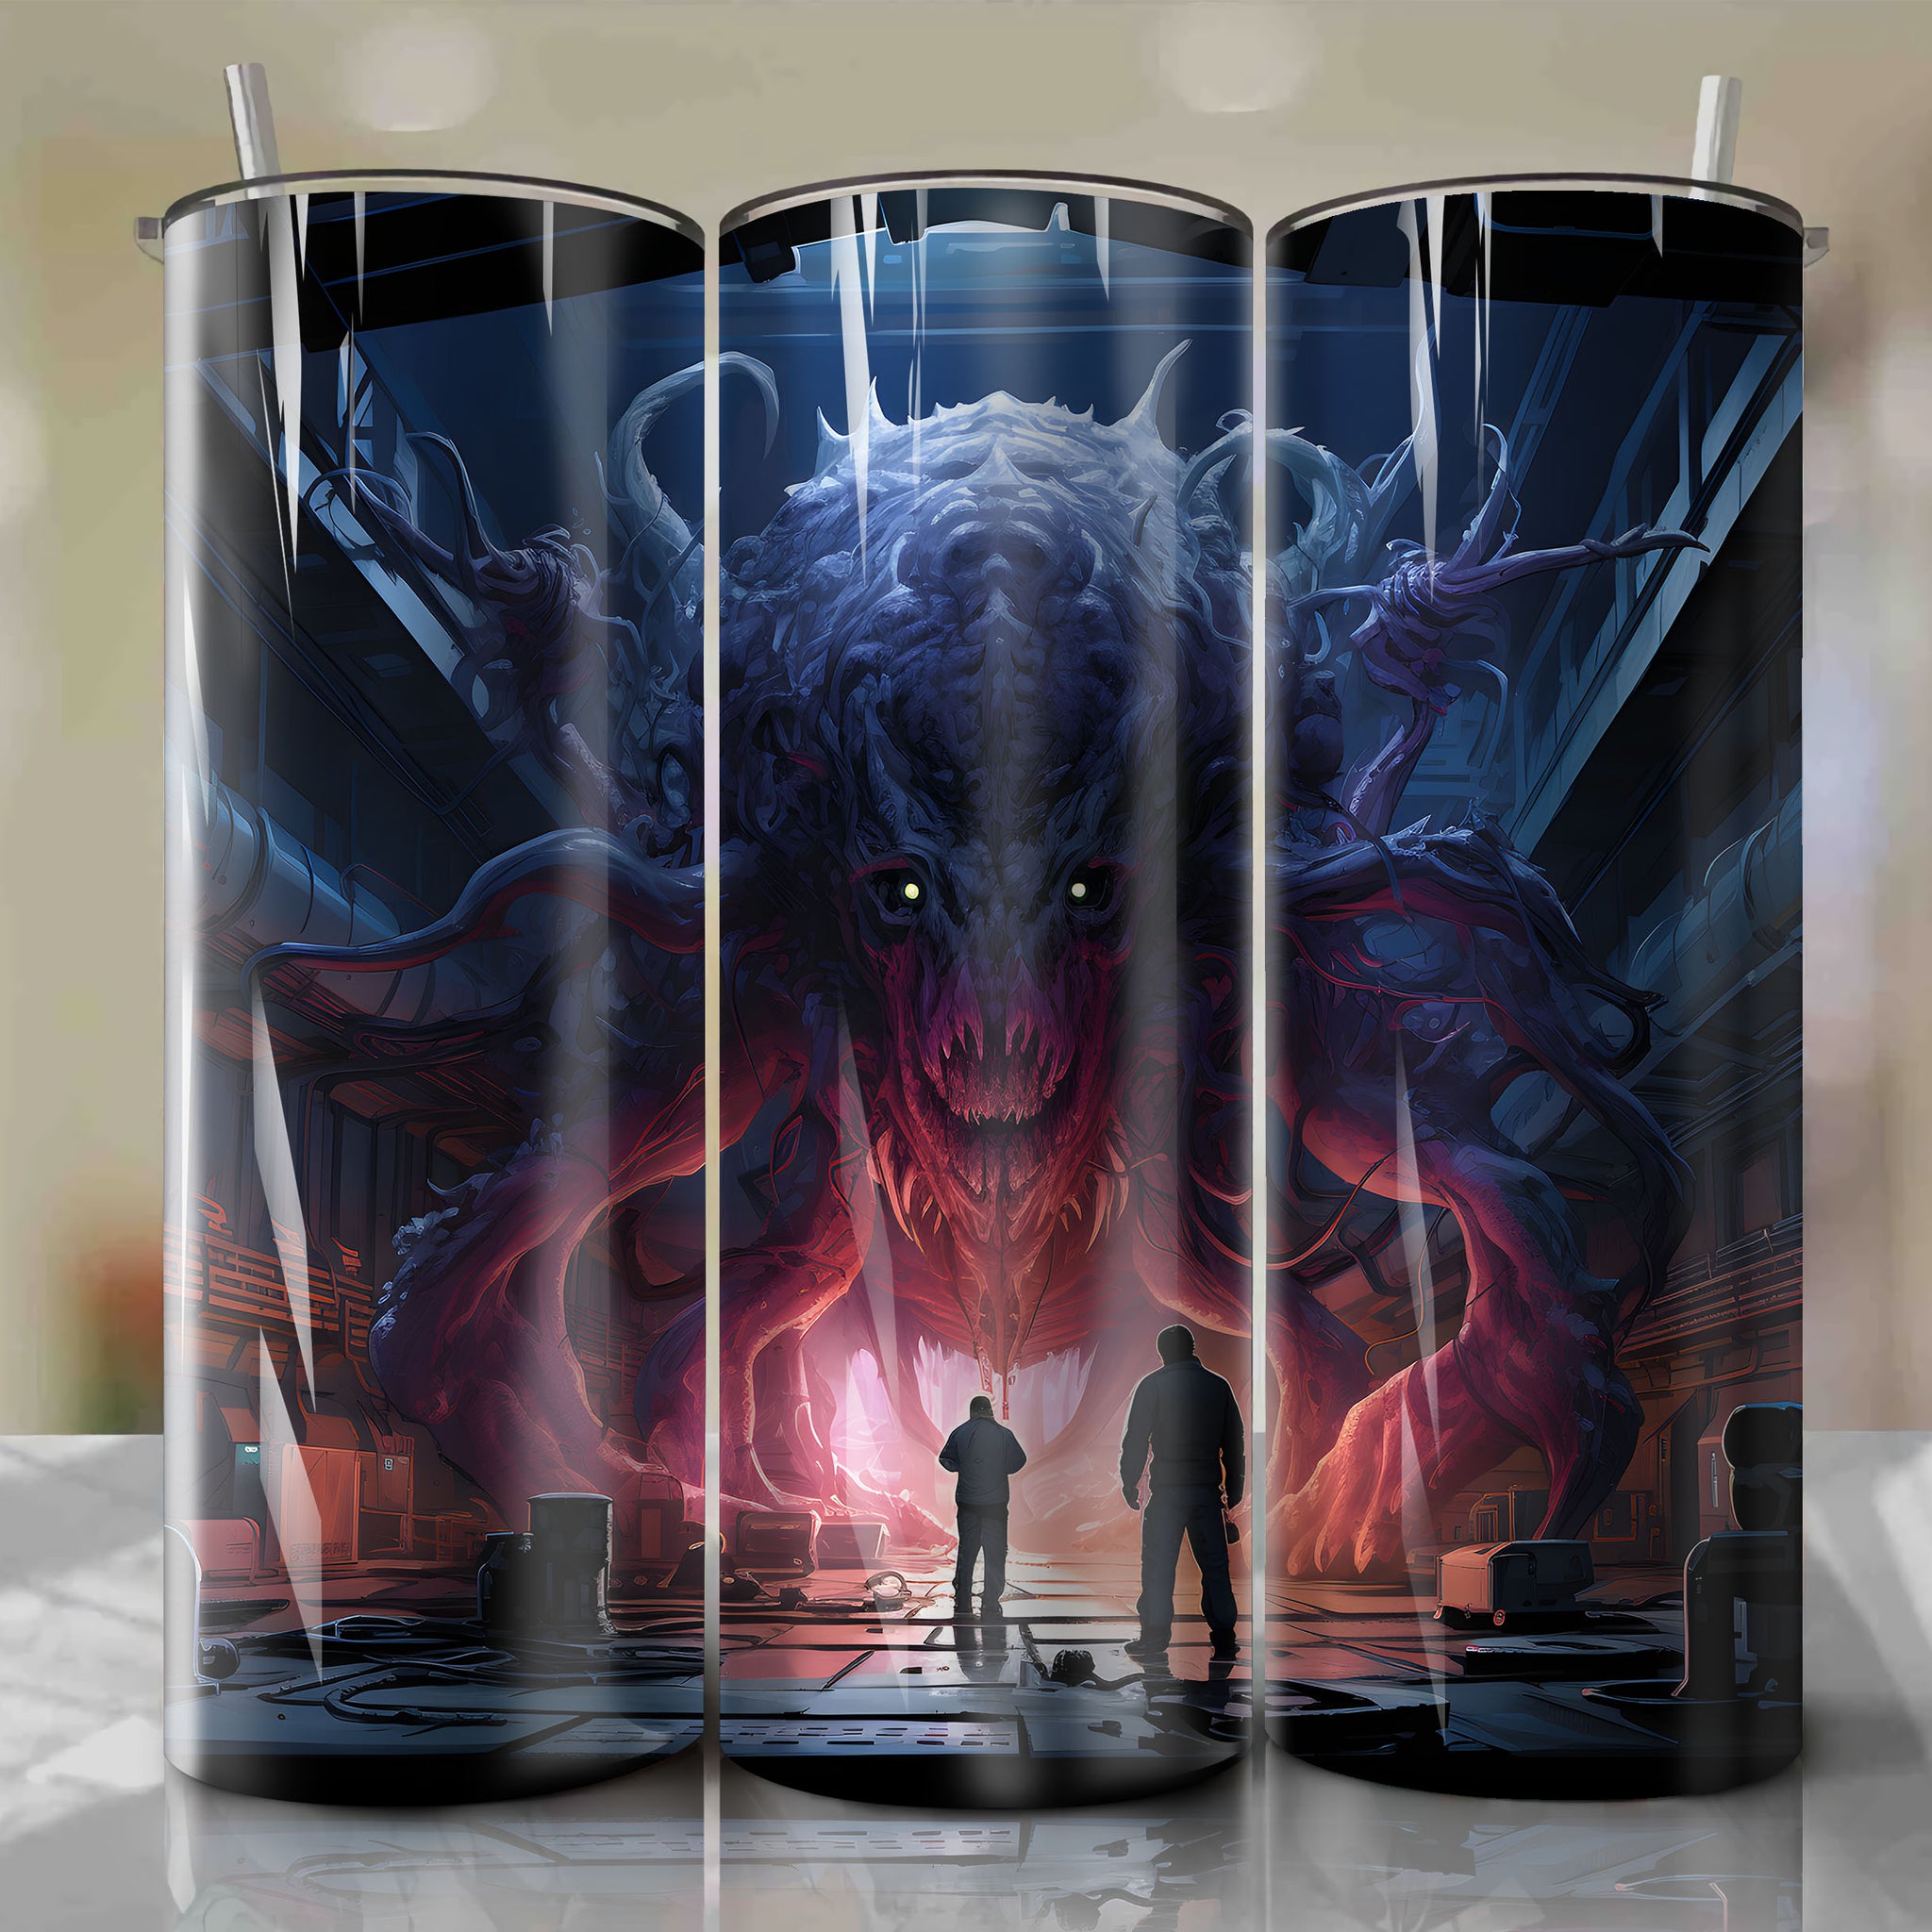 Tumbler Wrap - The Thing Monster Image for 20 oz Straight Tumblers - Antarctic Research Station Scene